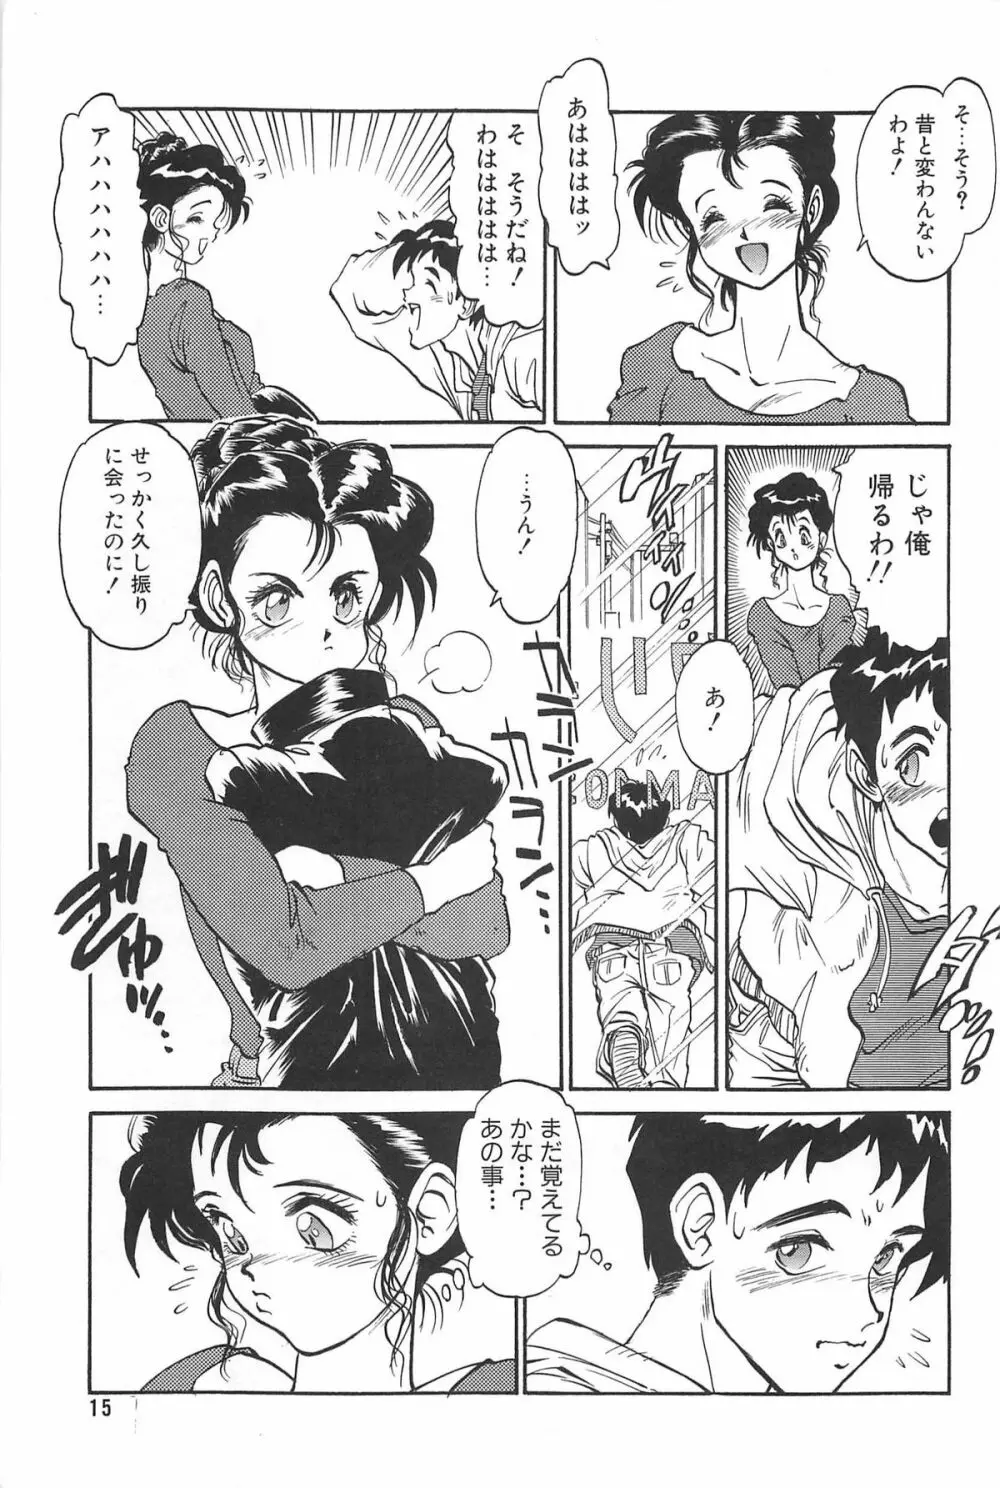 LOVE ME 1995 Page.17